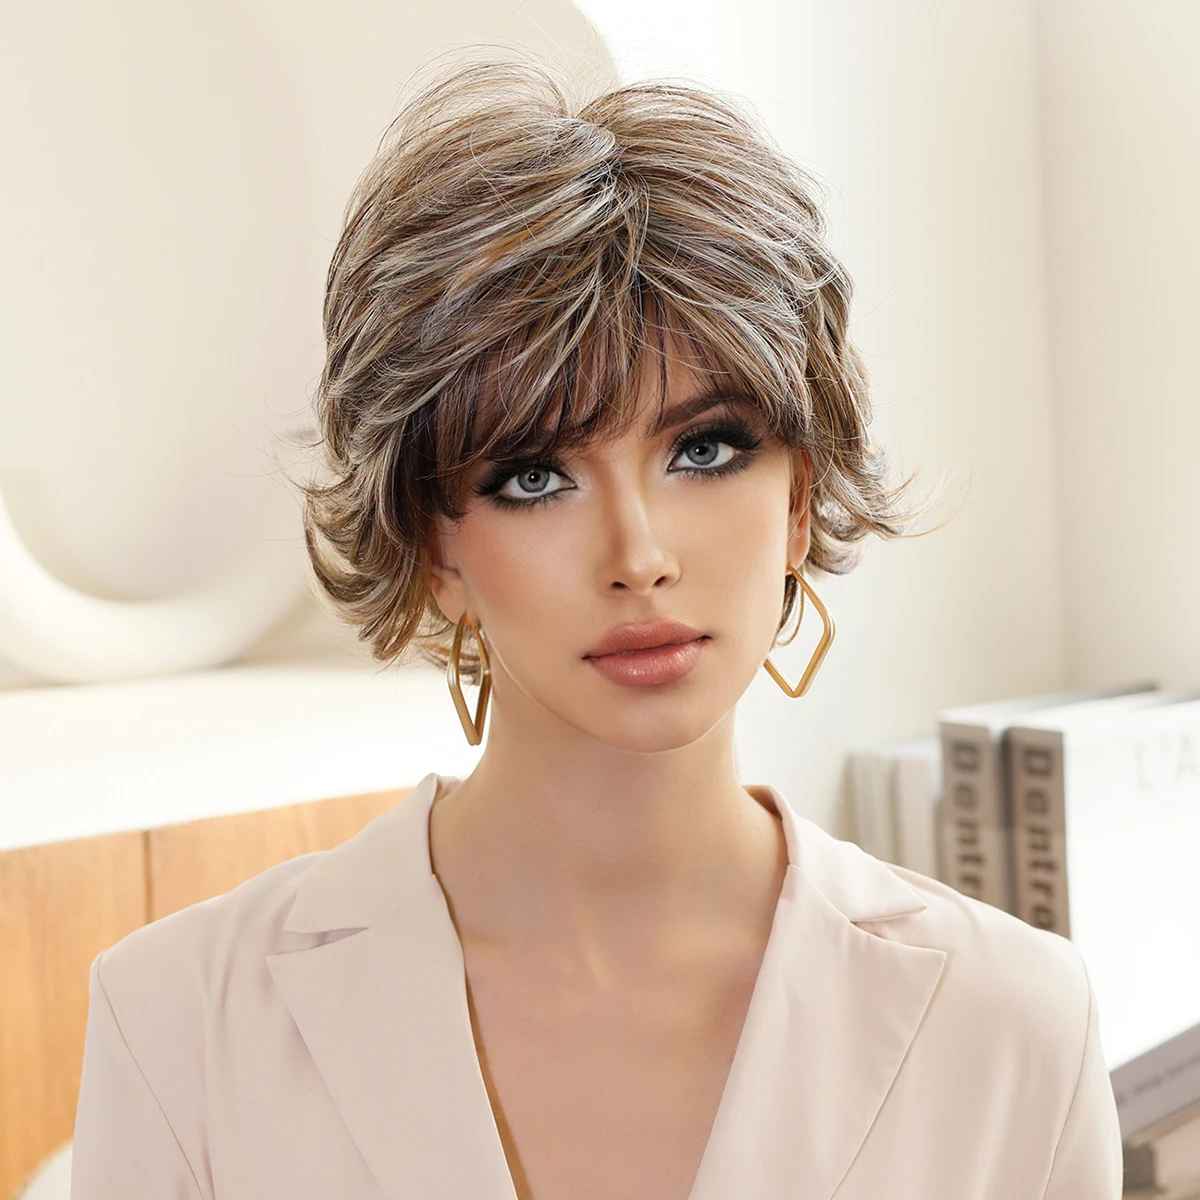 

7JHH WIGS Short Body Curls Blonde Highlight Brown Wigs Layered Fluffy Pixie Cut Wig with Bangs Heat Resistant Synthetic